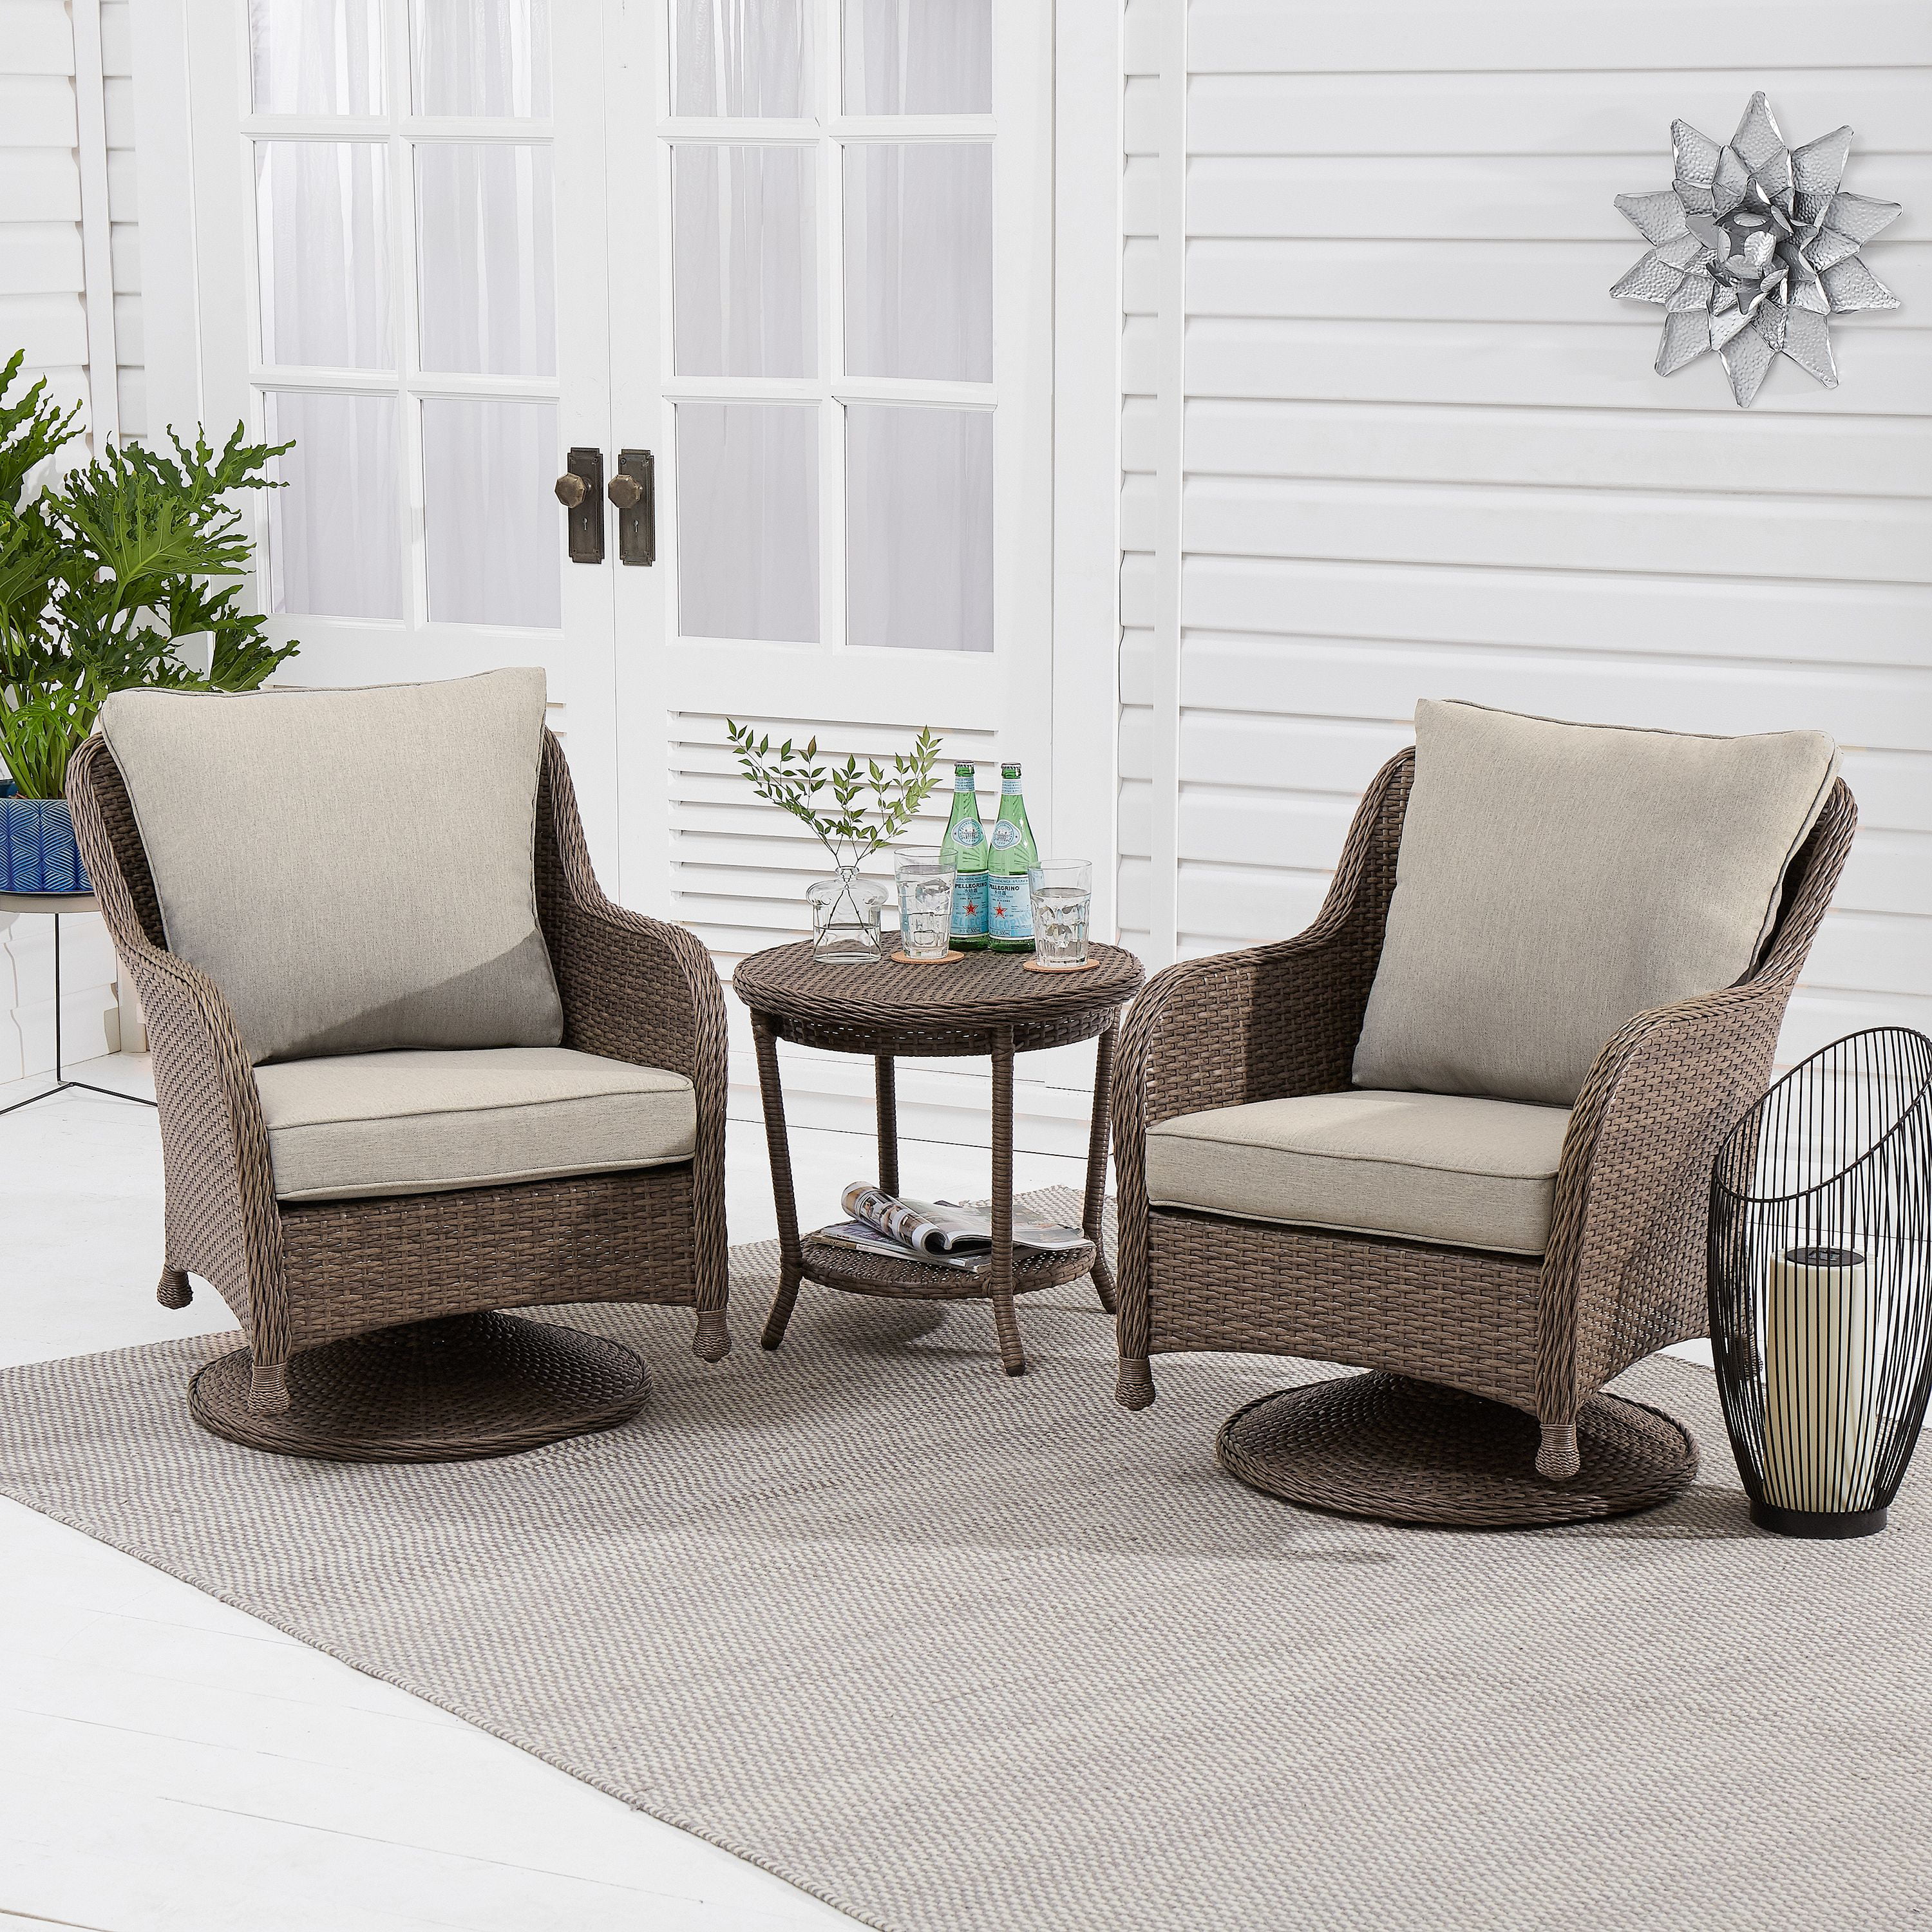 Better Homes Gardens Hayward 3 Piece Wicker Motion Patio Chat